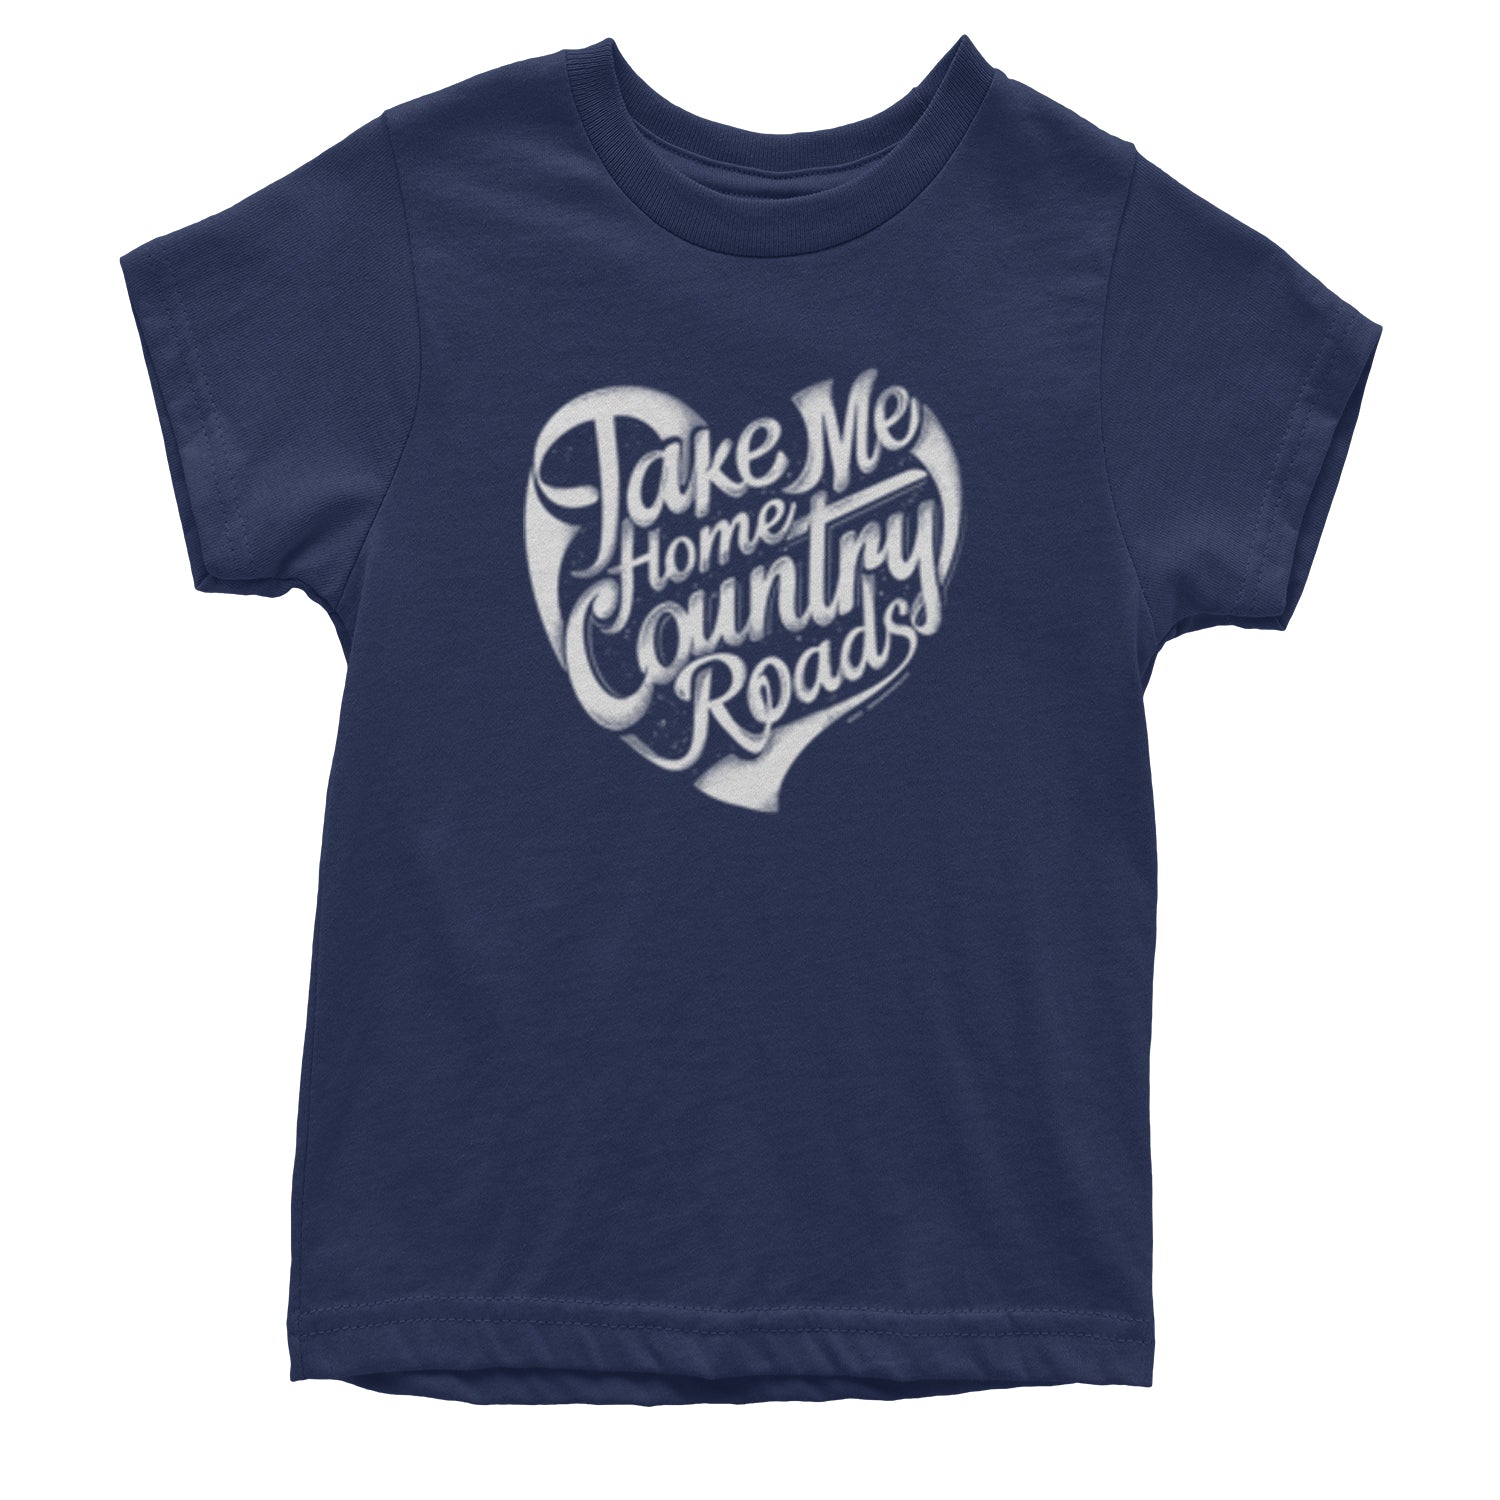 Take Me Home Country Roads Youth T-shirt country, karaoke, roads by Expression Tees